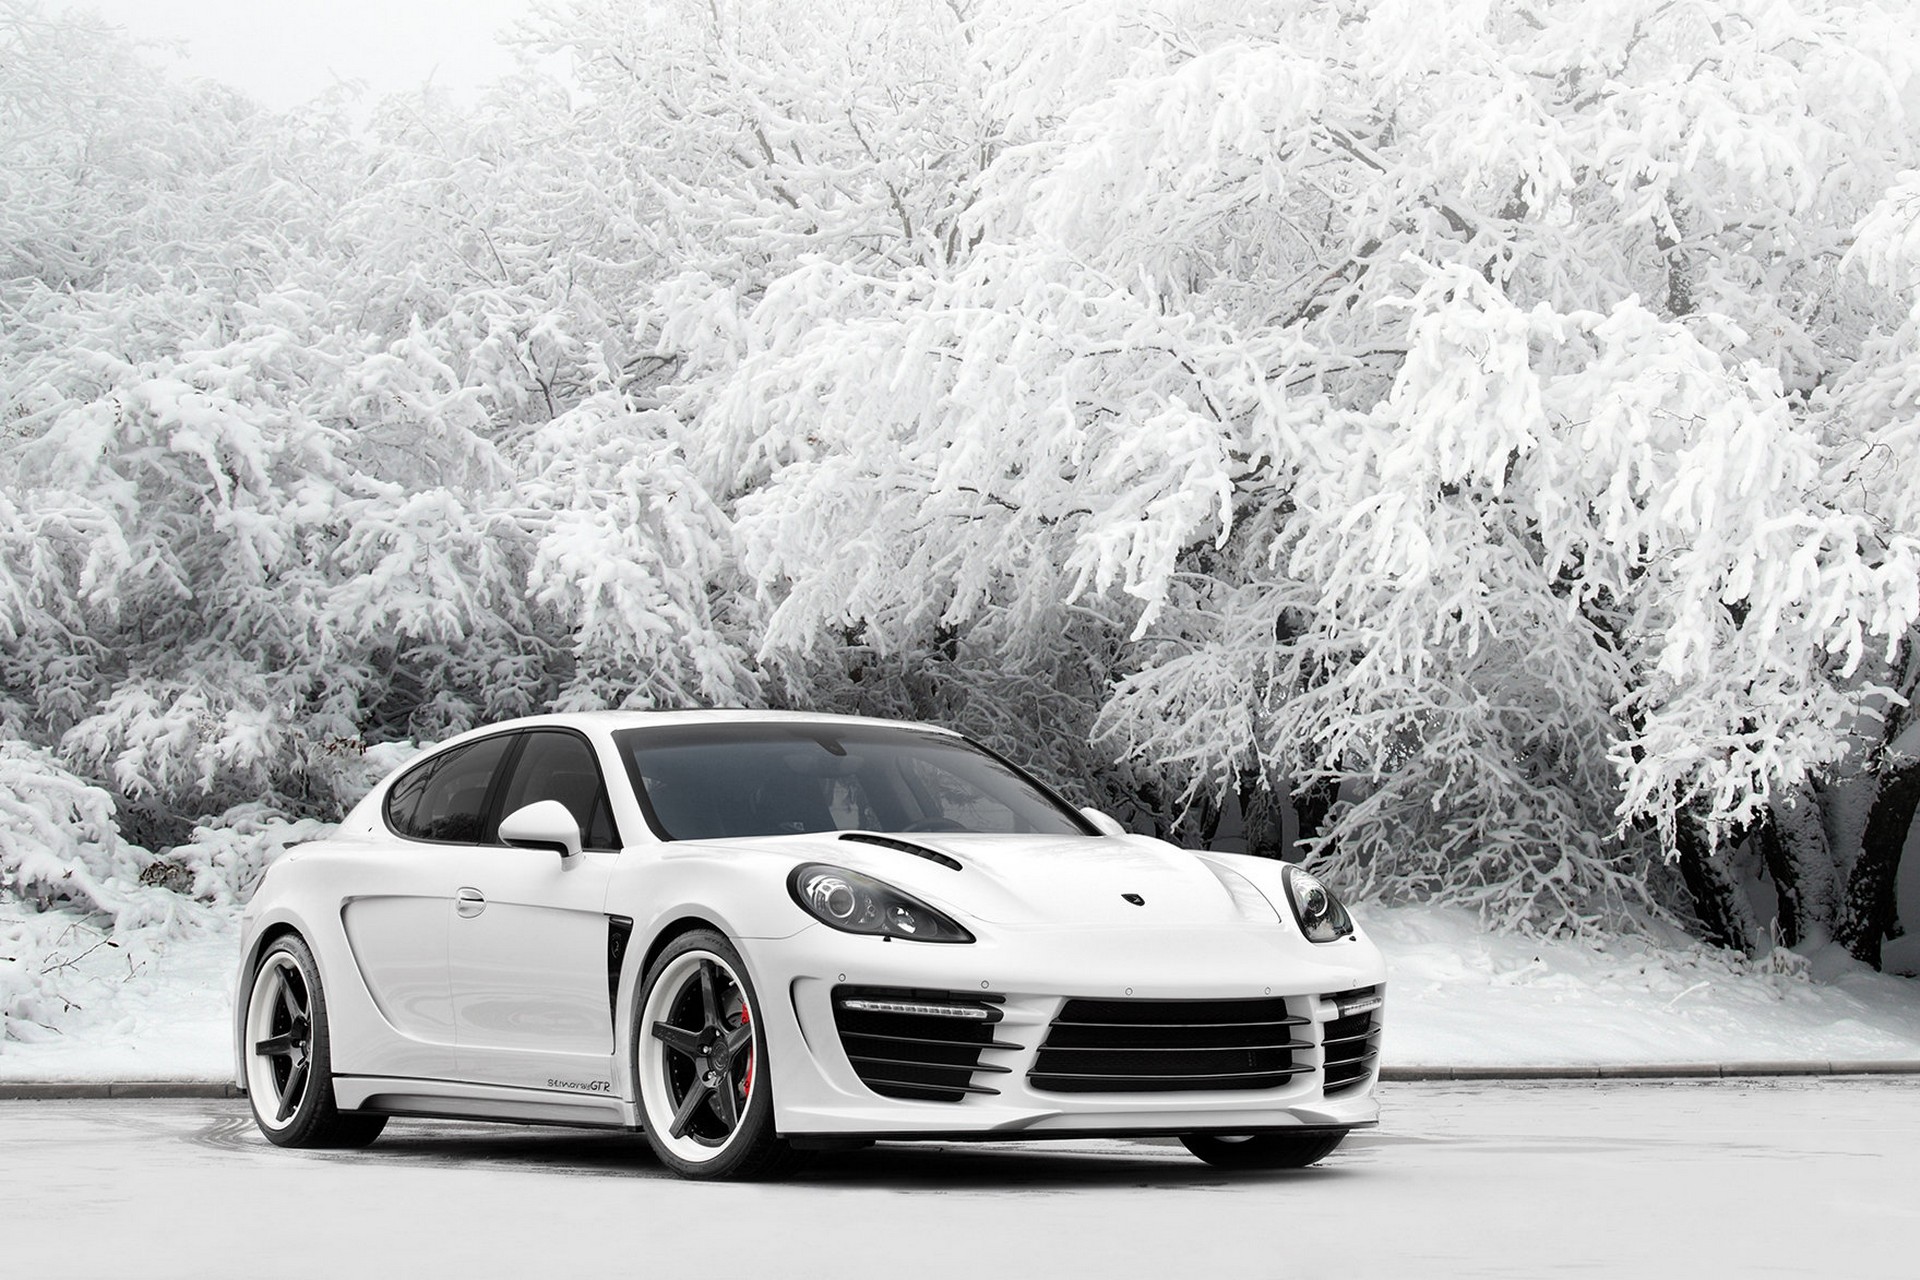 Check our price and buy Topcar Design body kit for Porsche Panamera GTR Edition